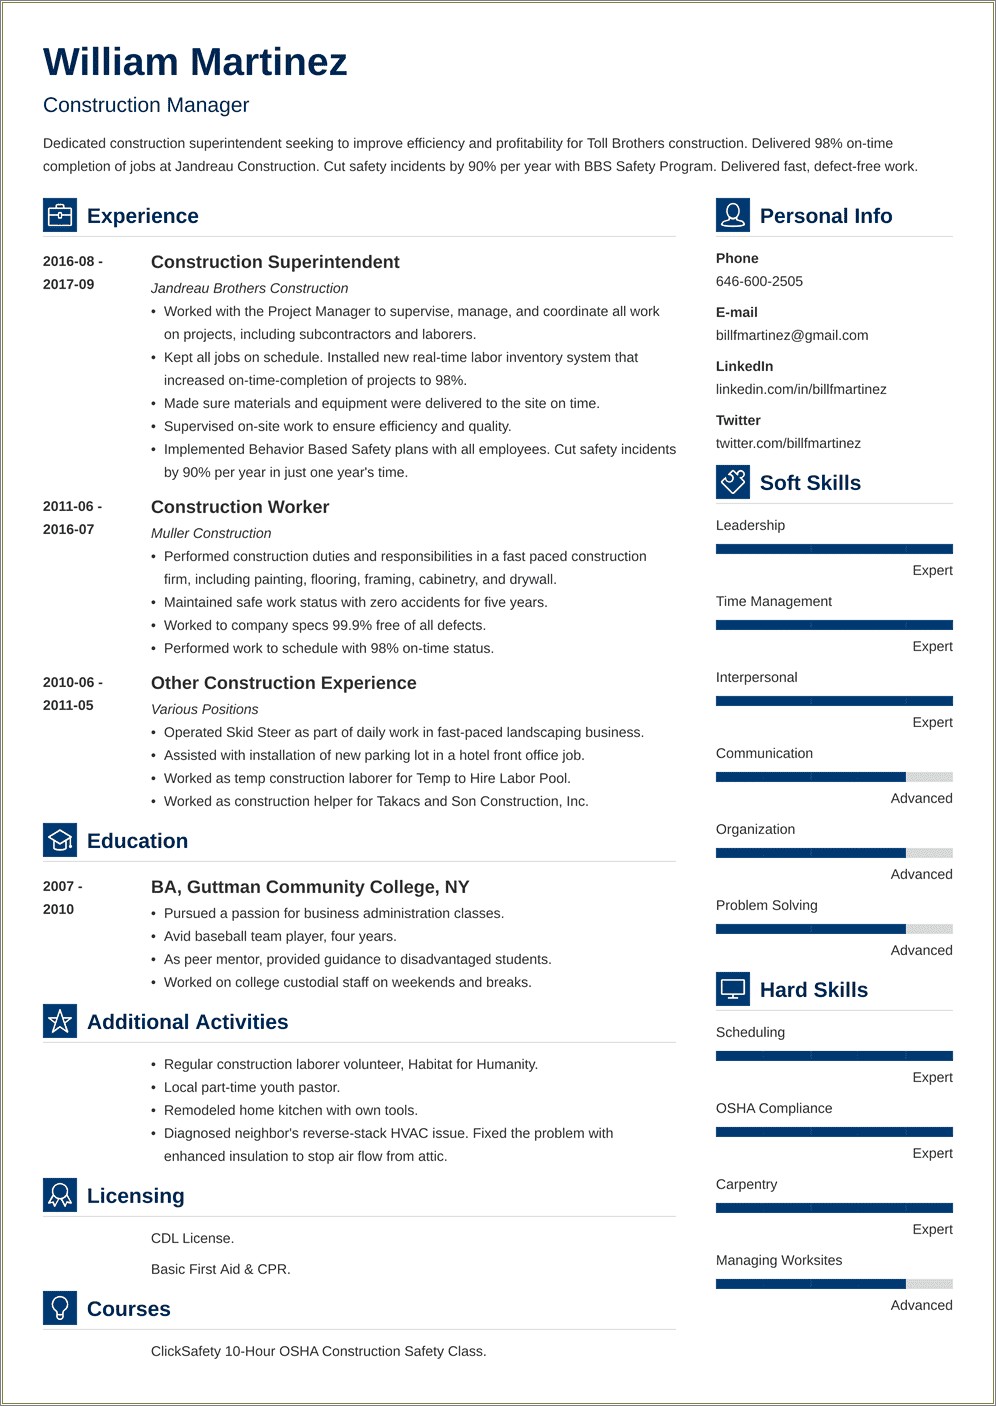 Construction Skills And Abilities For Resume